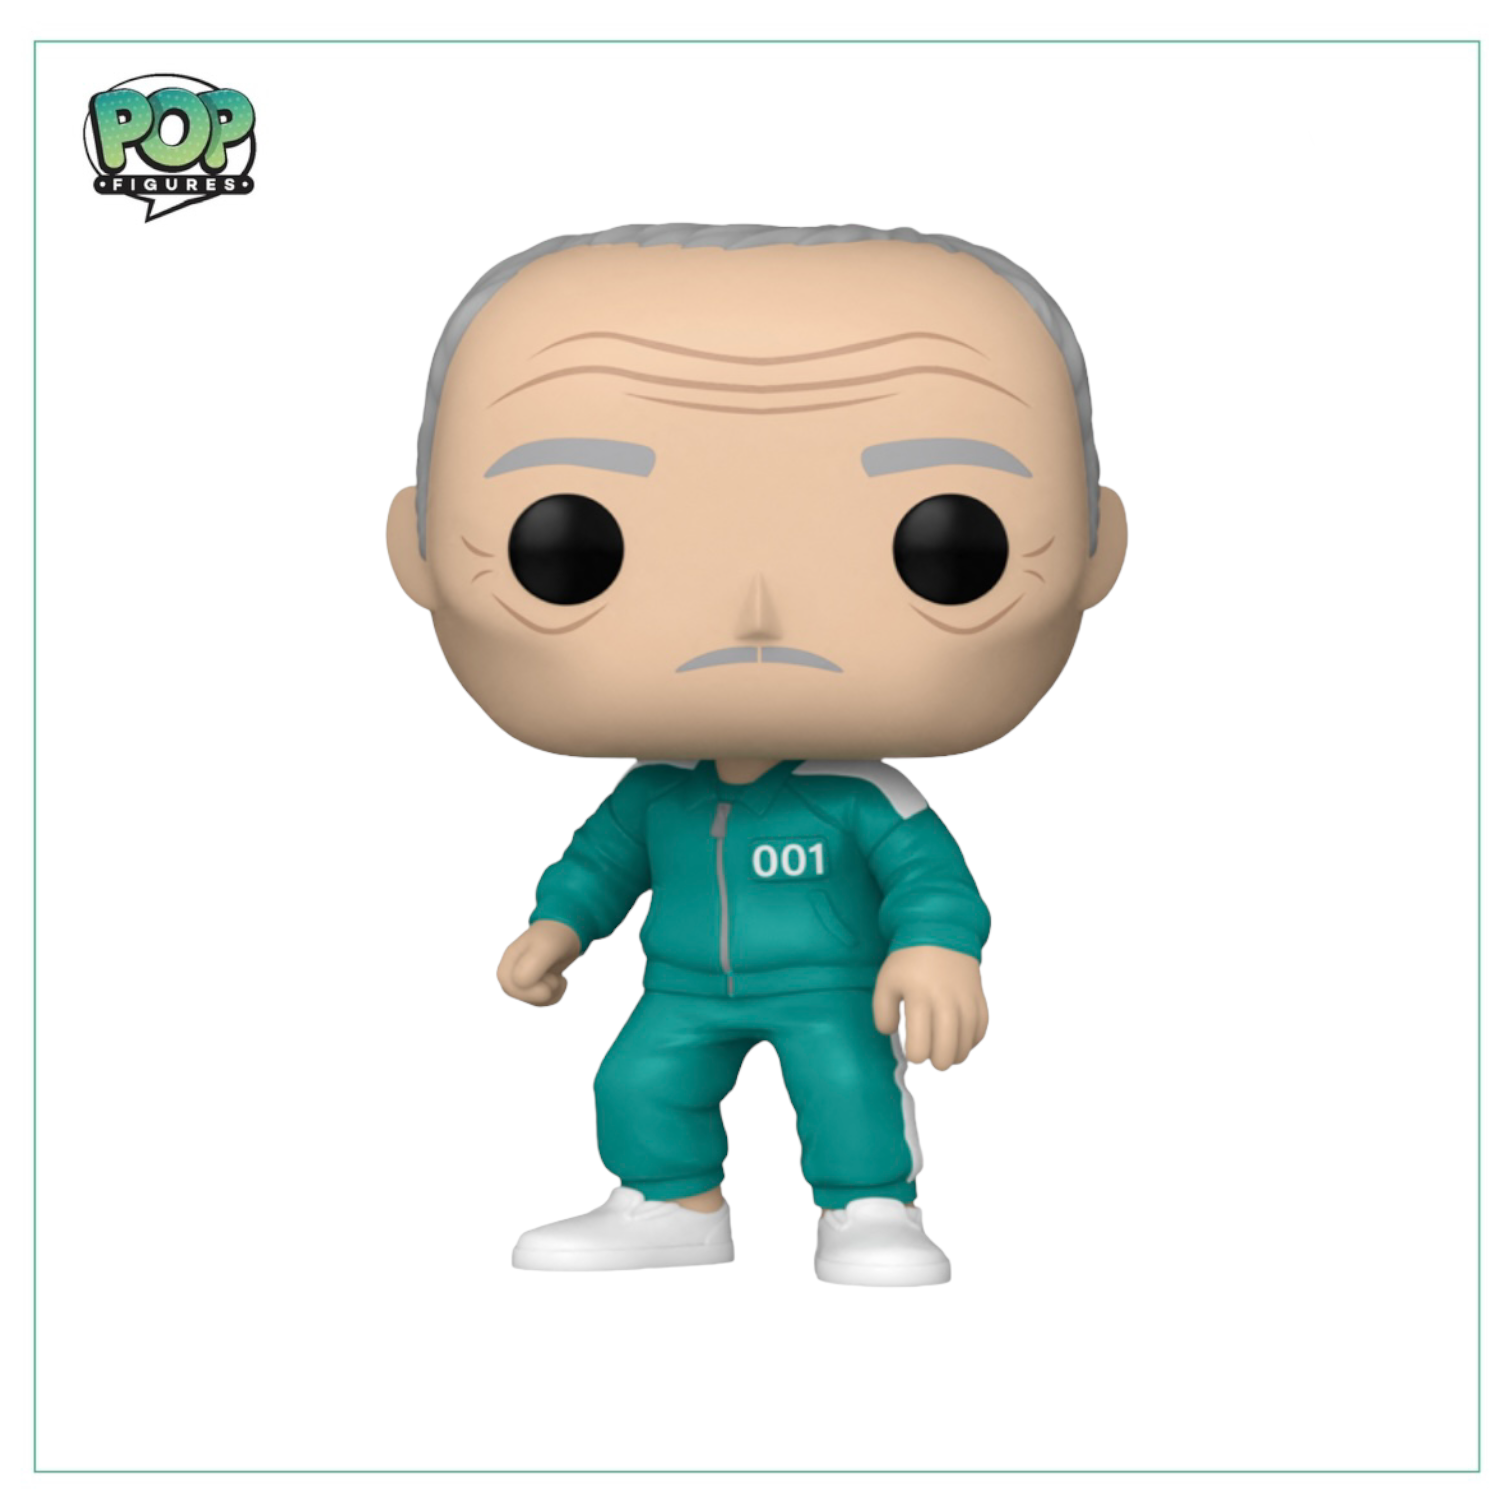 Player 001: Oh lL-Nam #1223 Funko Pop! Squid Game